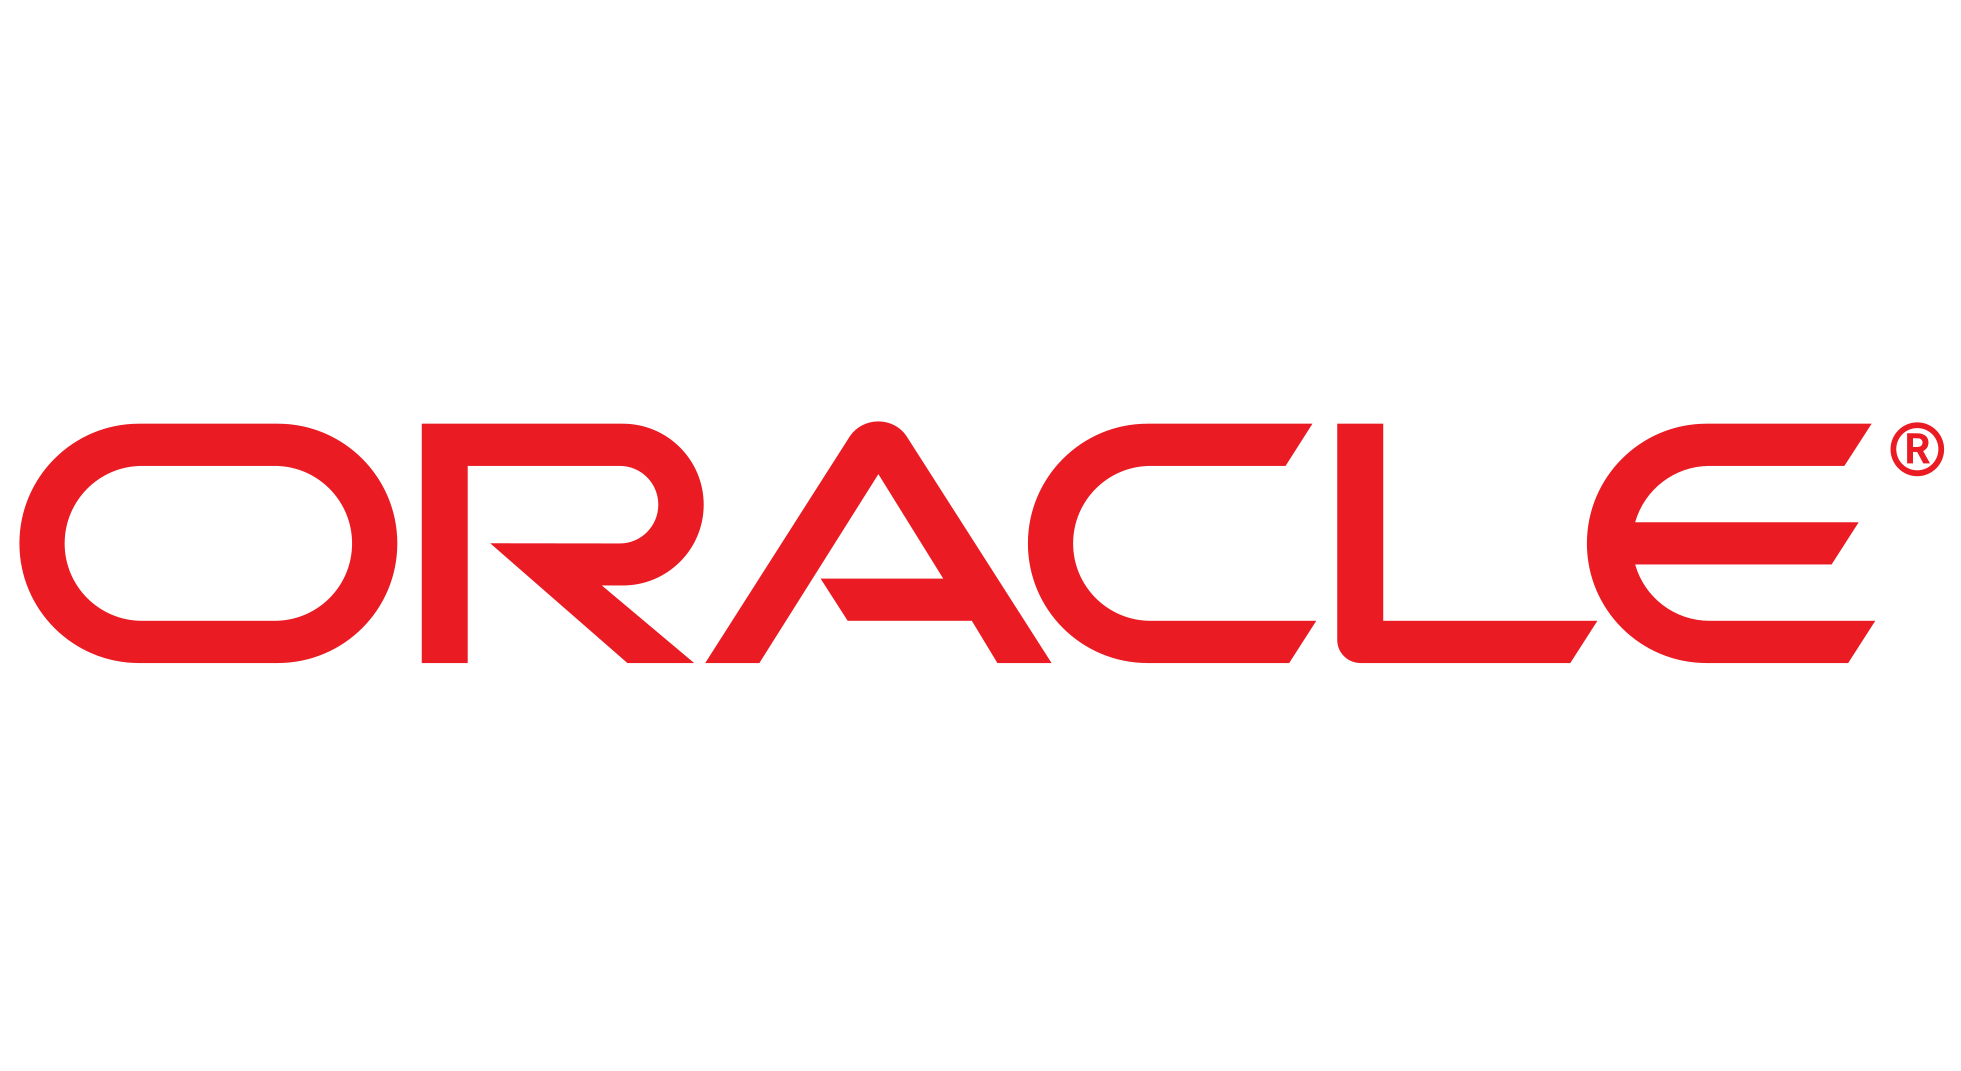 Benefits Of Oracle Certification For Your Career